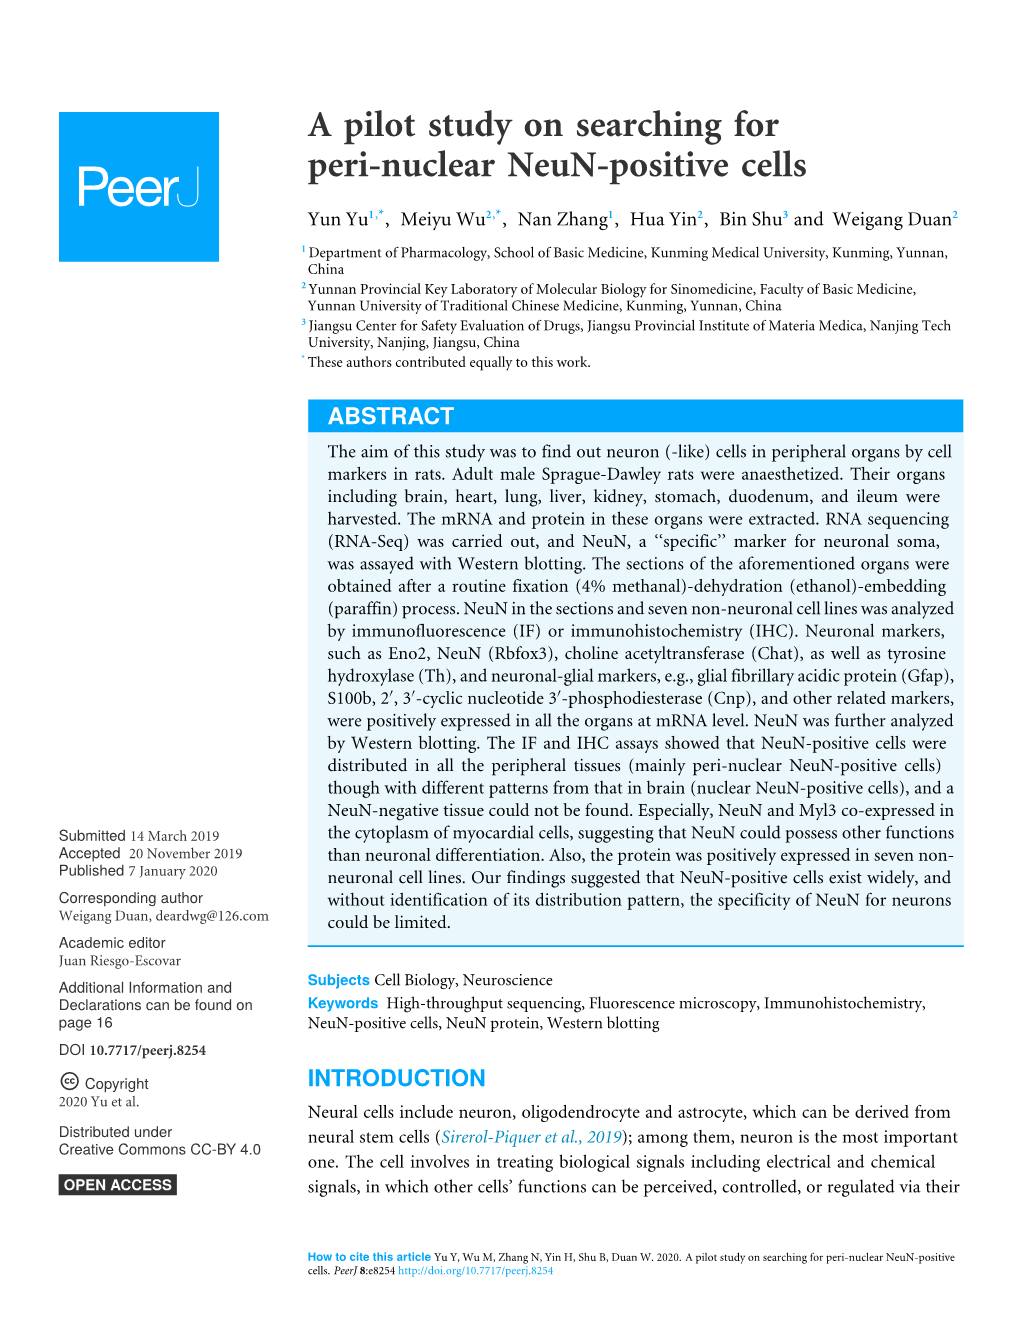 A Pilot Study on Searching for Peri-Nuclear Neun-Positive Cells